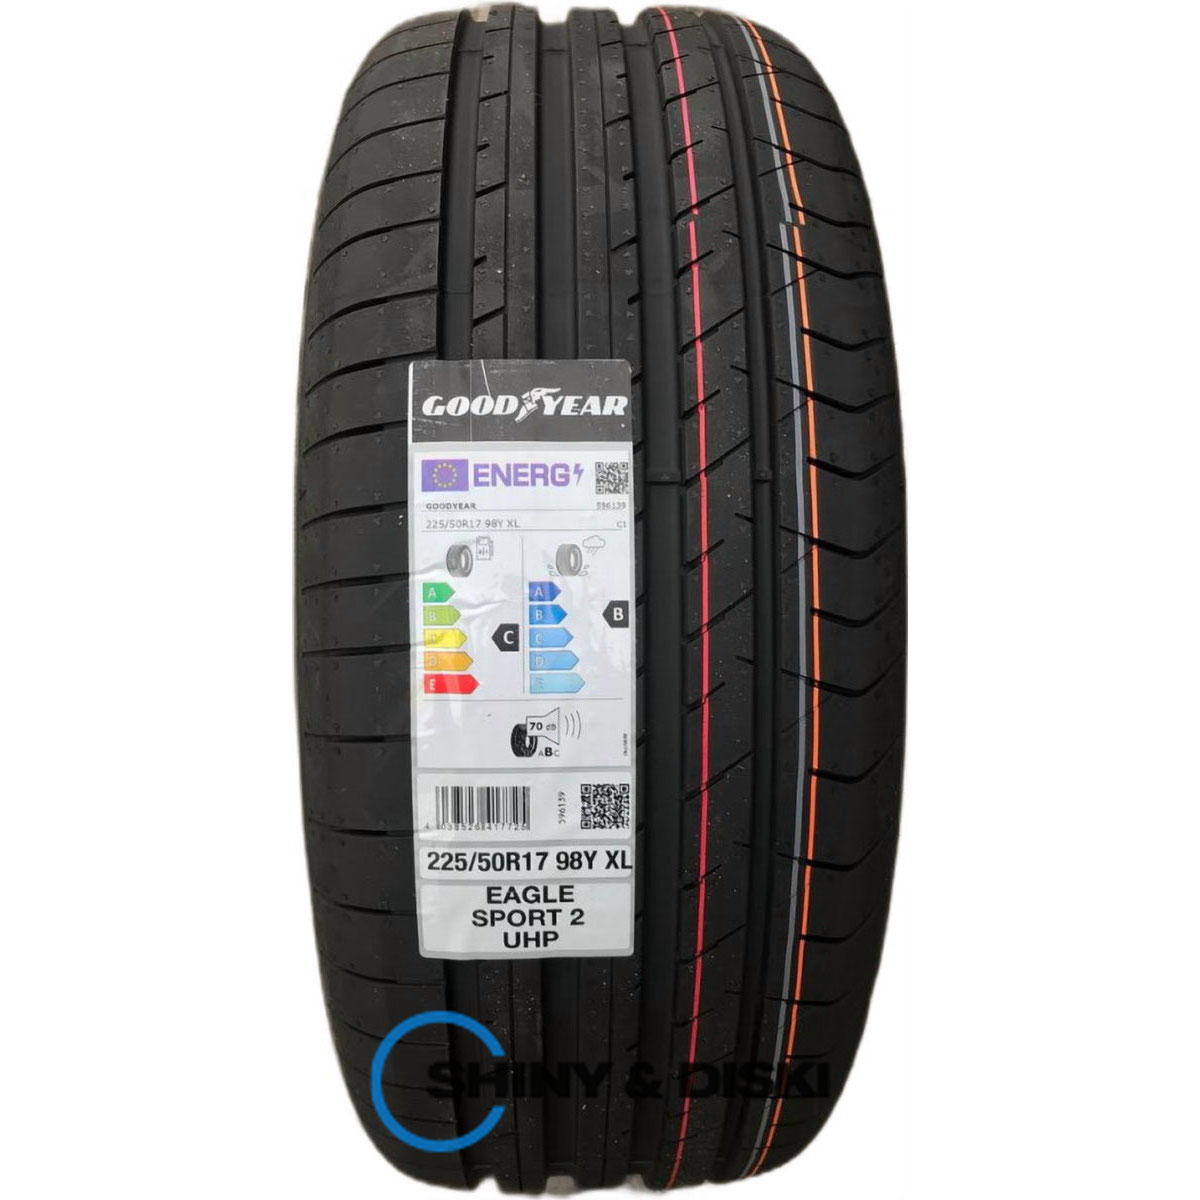 покришки goodyear eagle sport 2 uhp 225/50 r17 98y xl fp